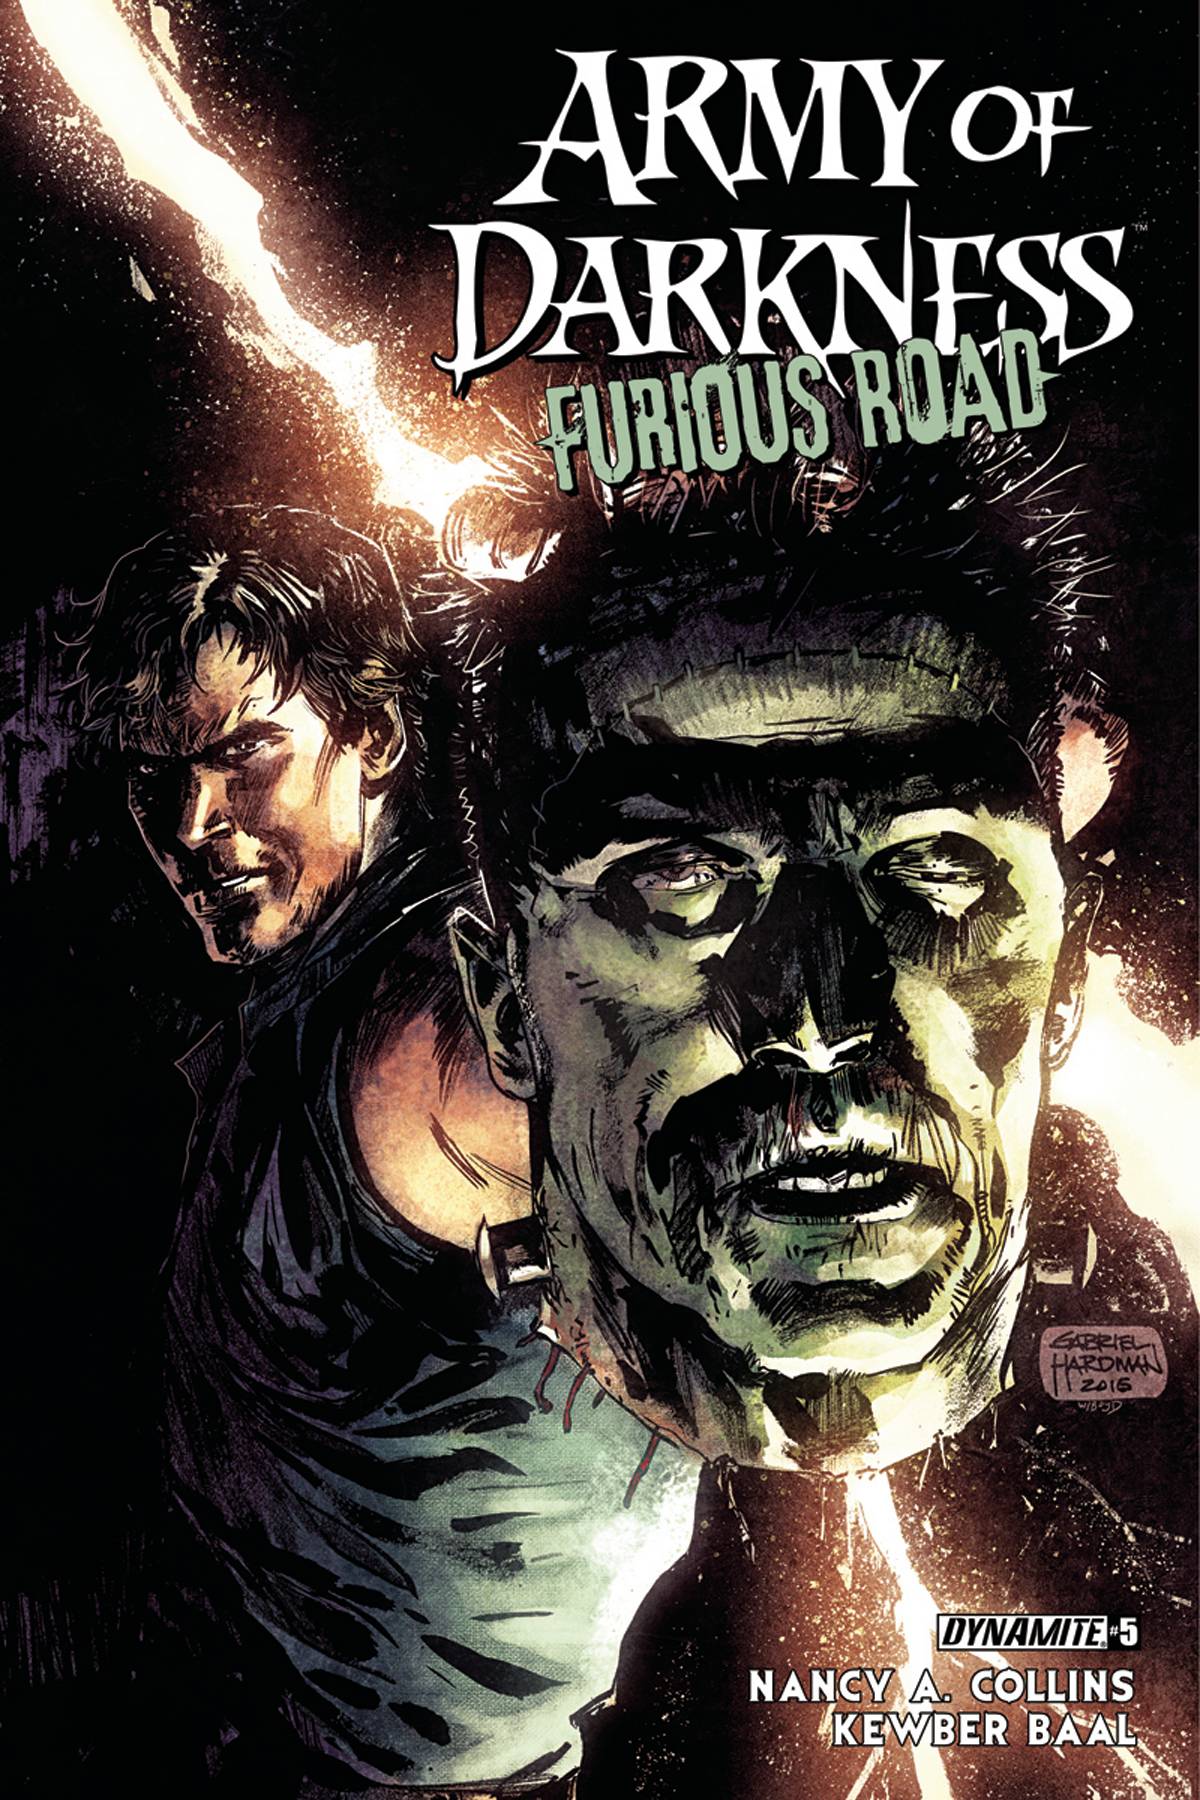 Army of Darkness Furious Road #5 Cover A Hardman